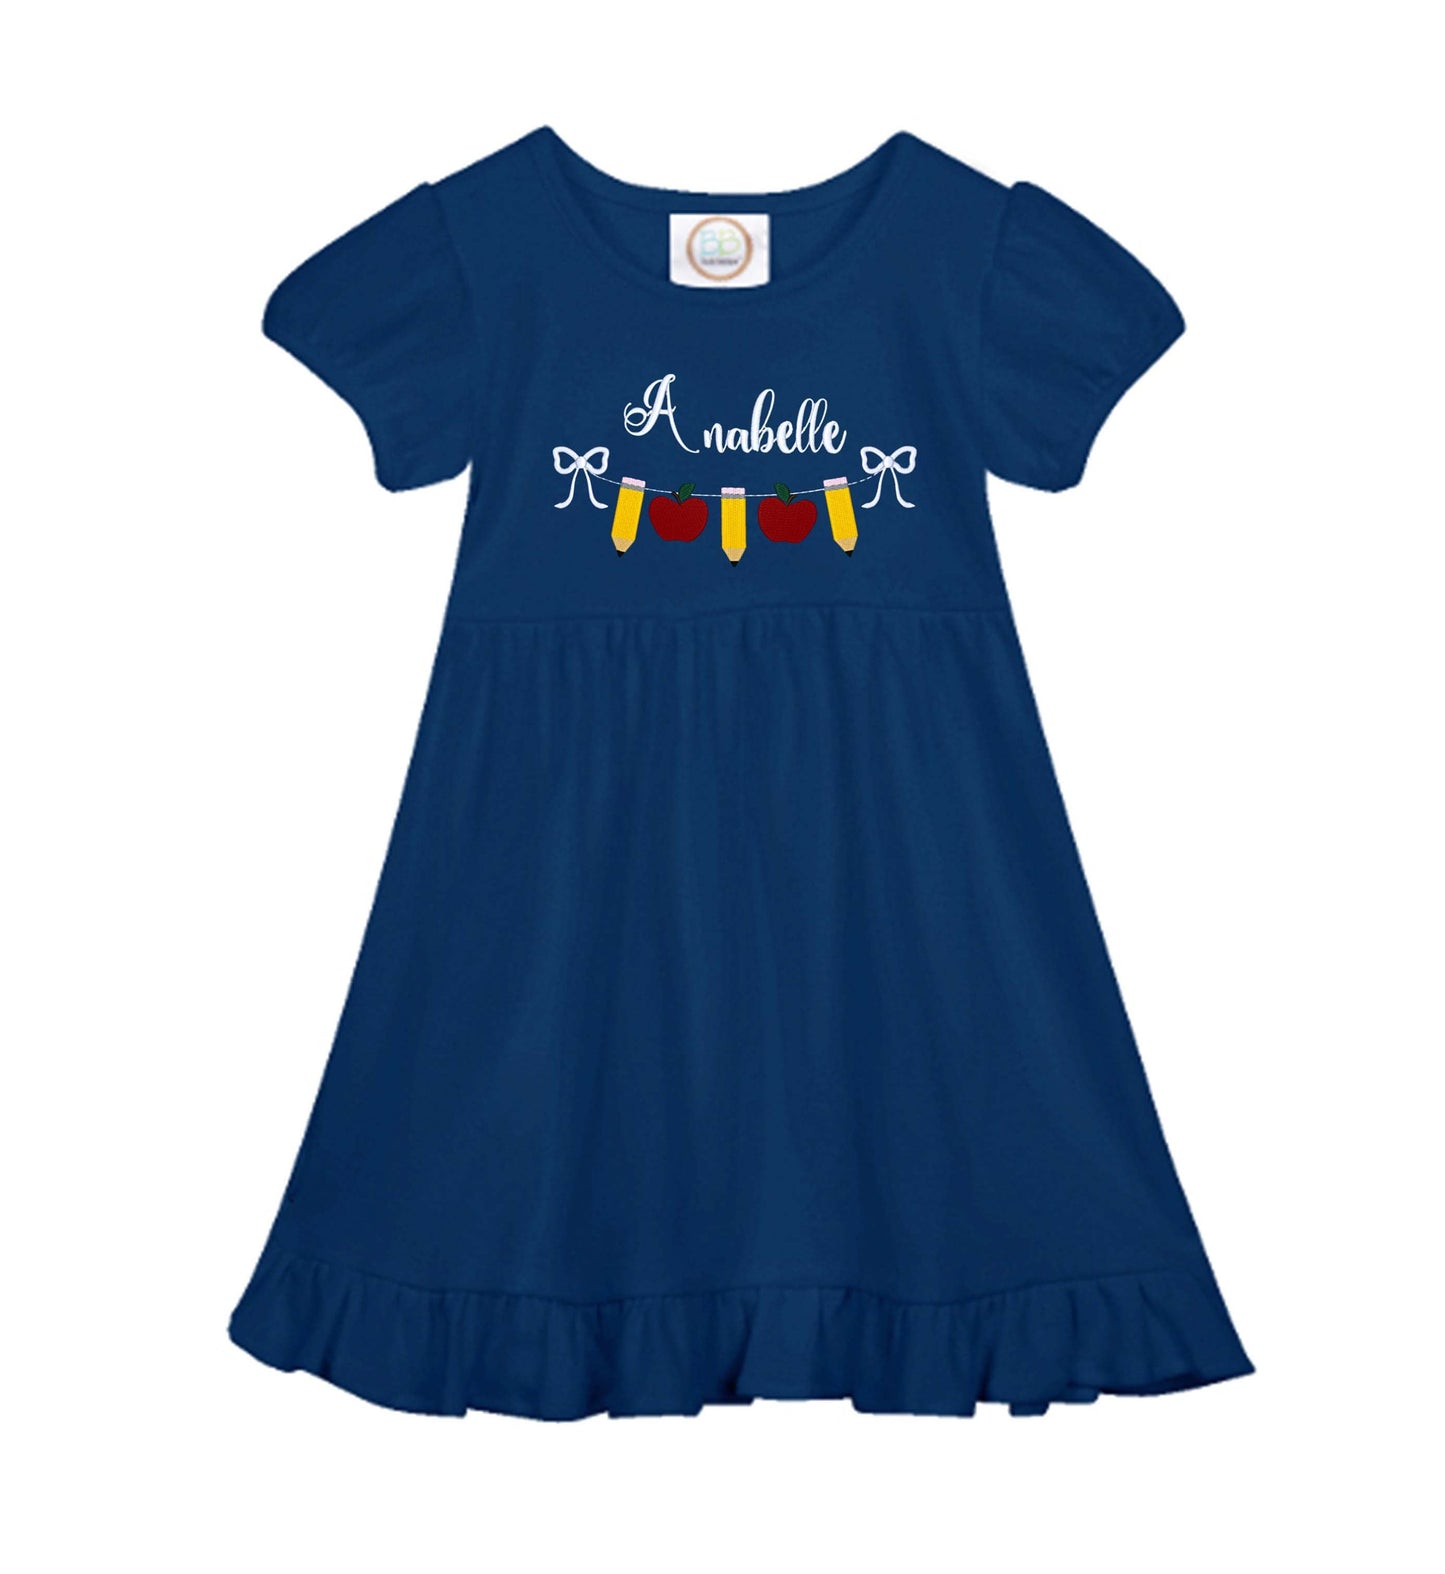 Back to School Personalized Dress, Girls Pencil School dress,  Apple school outfits, Personalized Girls back to school dress,  School Dress